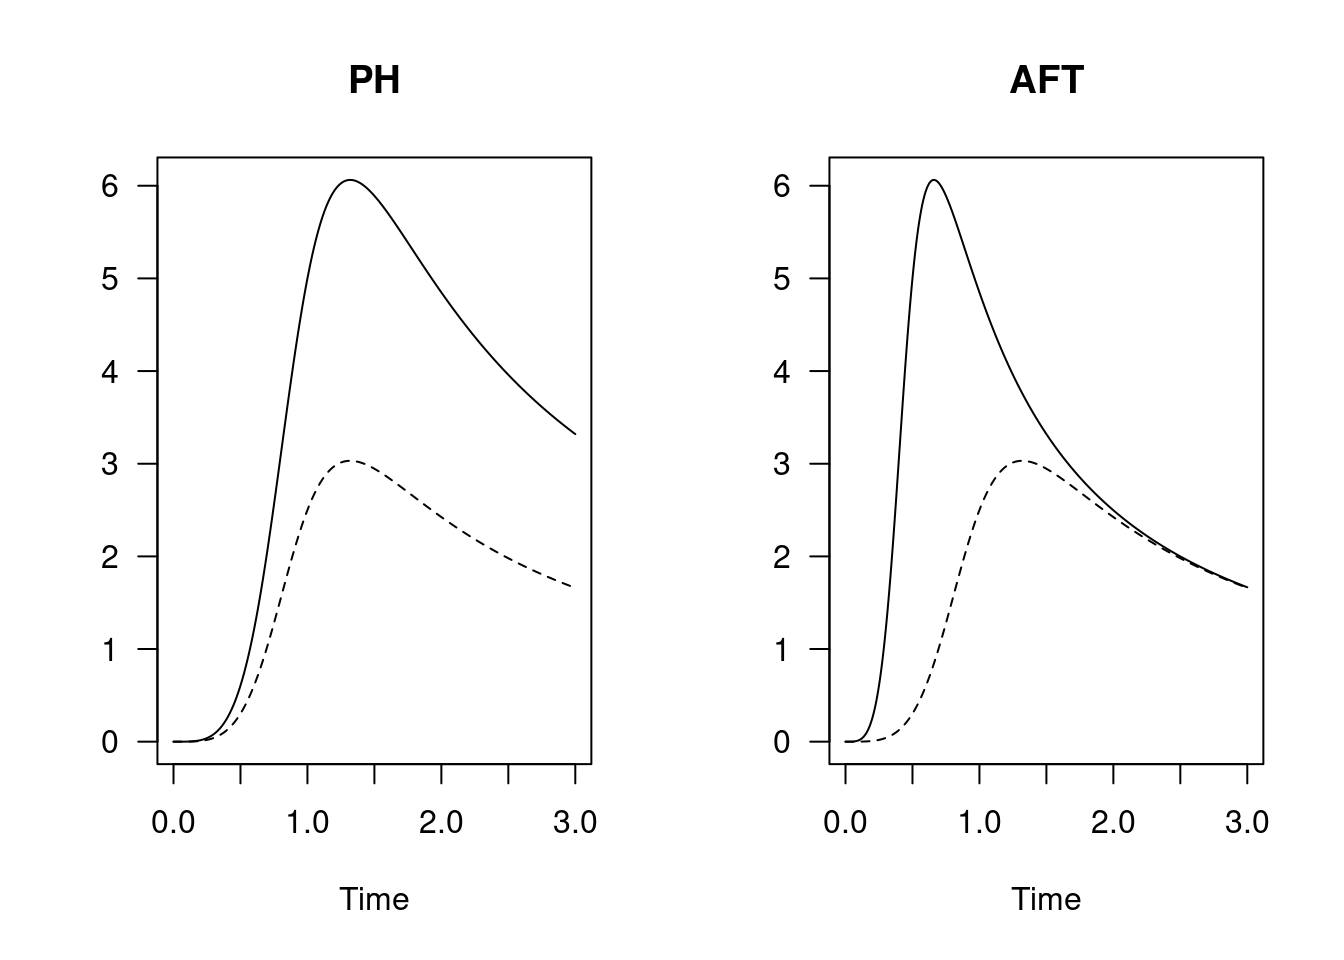 Proportional hazards (left) and accelerated failure time model (right). The baseline distribution is Loglogistic with shape 5 (dashed).